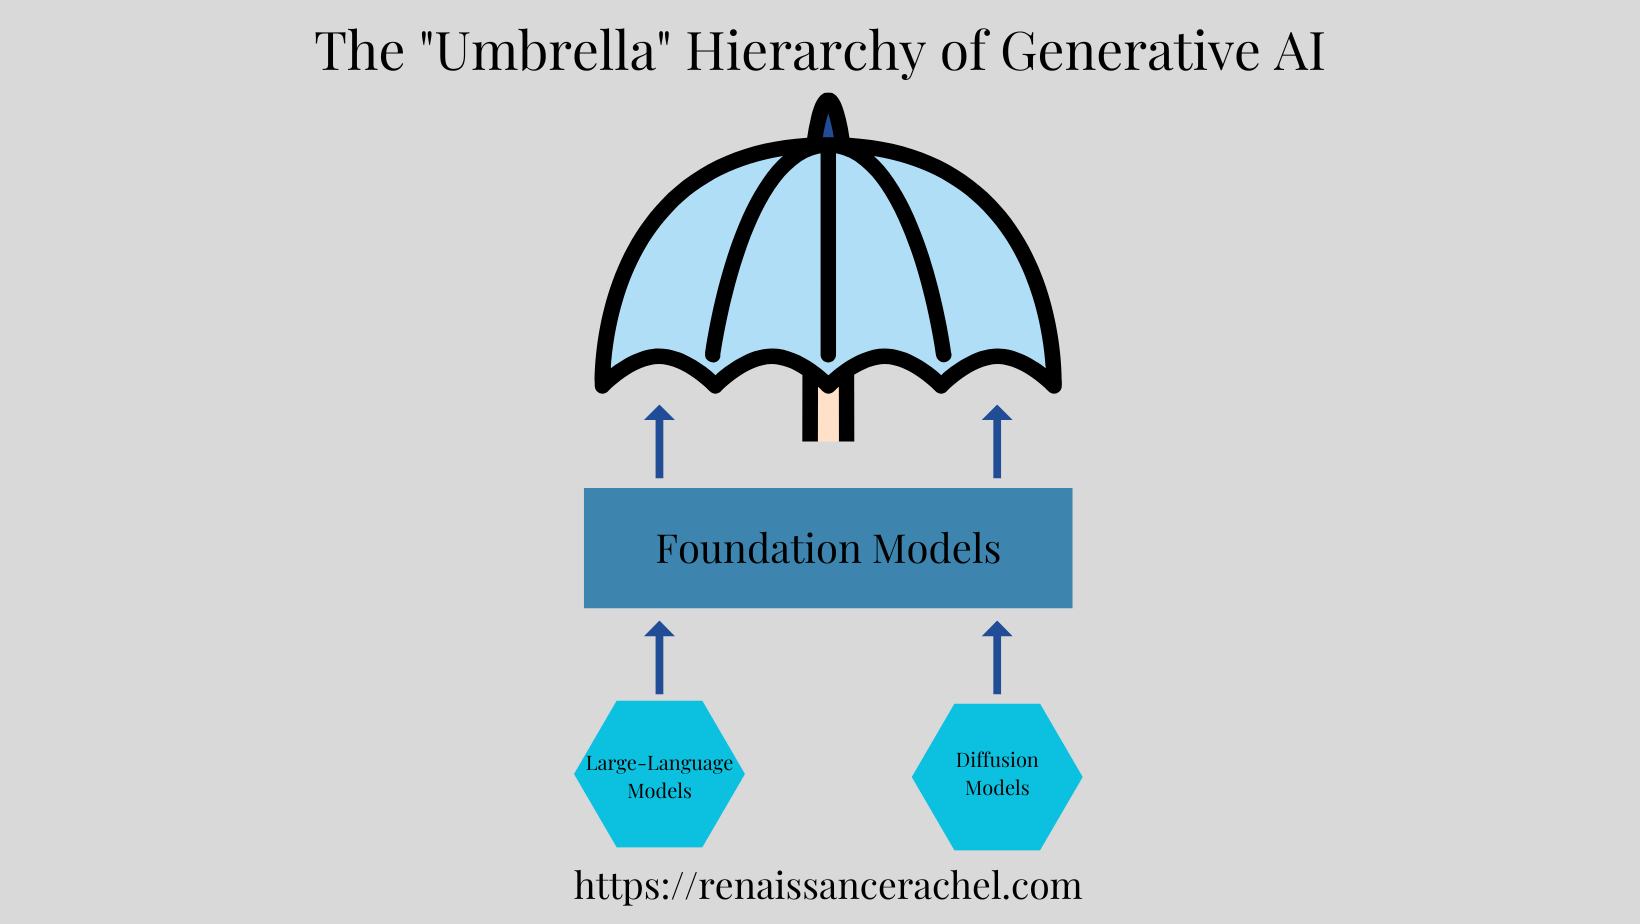 The umbrella concept as a simple representation of Generative AI's need for foundation models and AI algorithms.